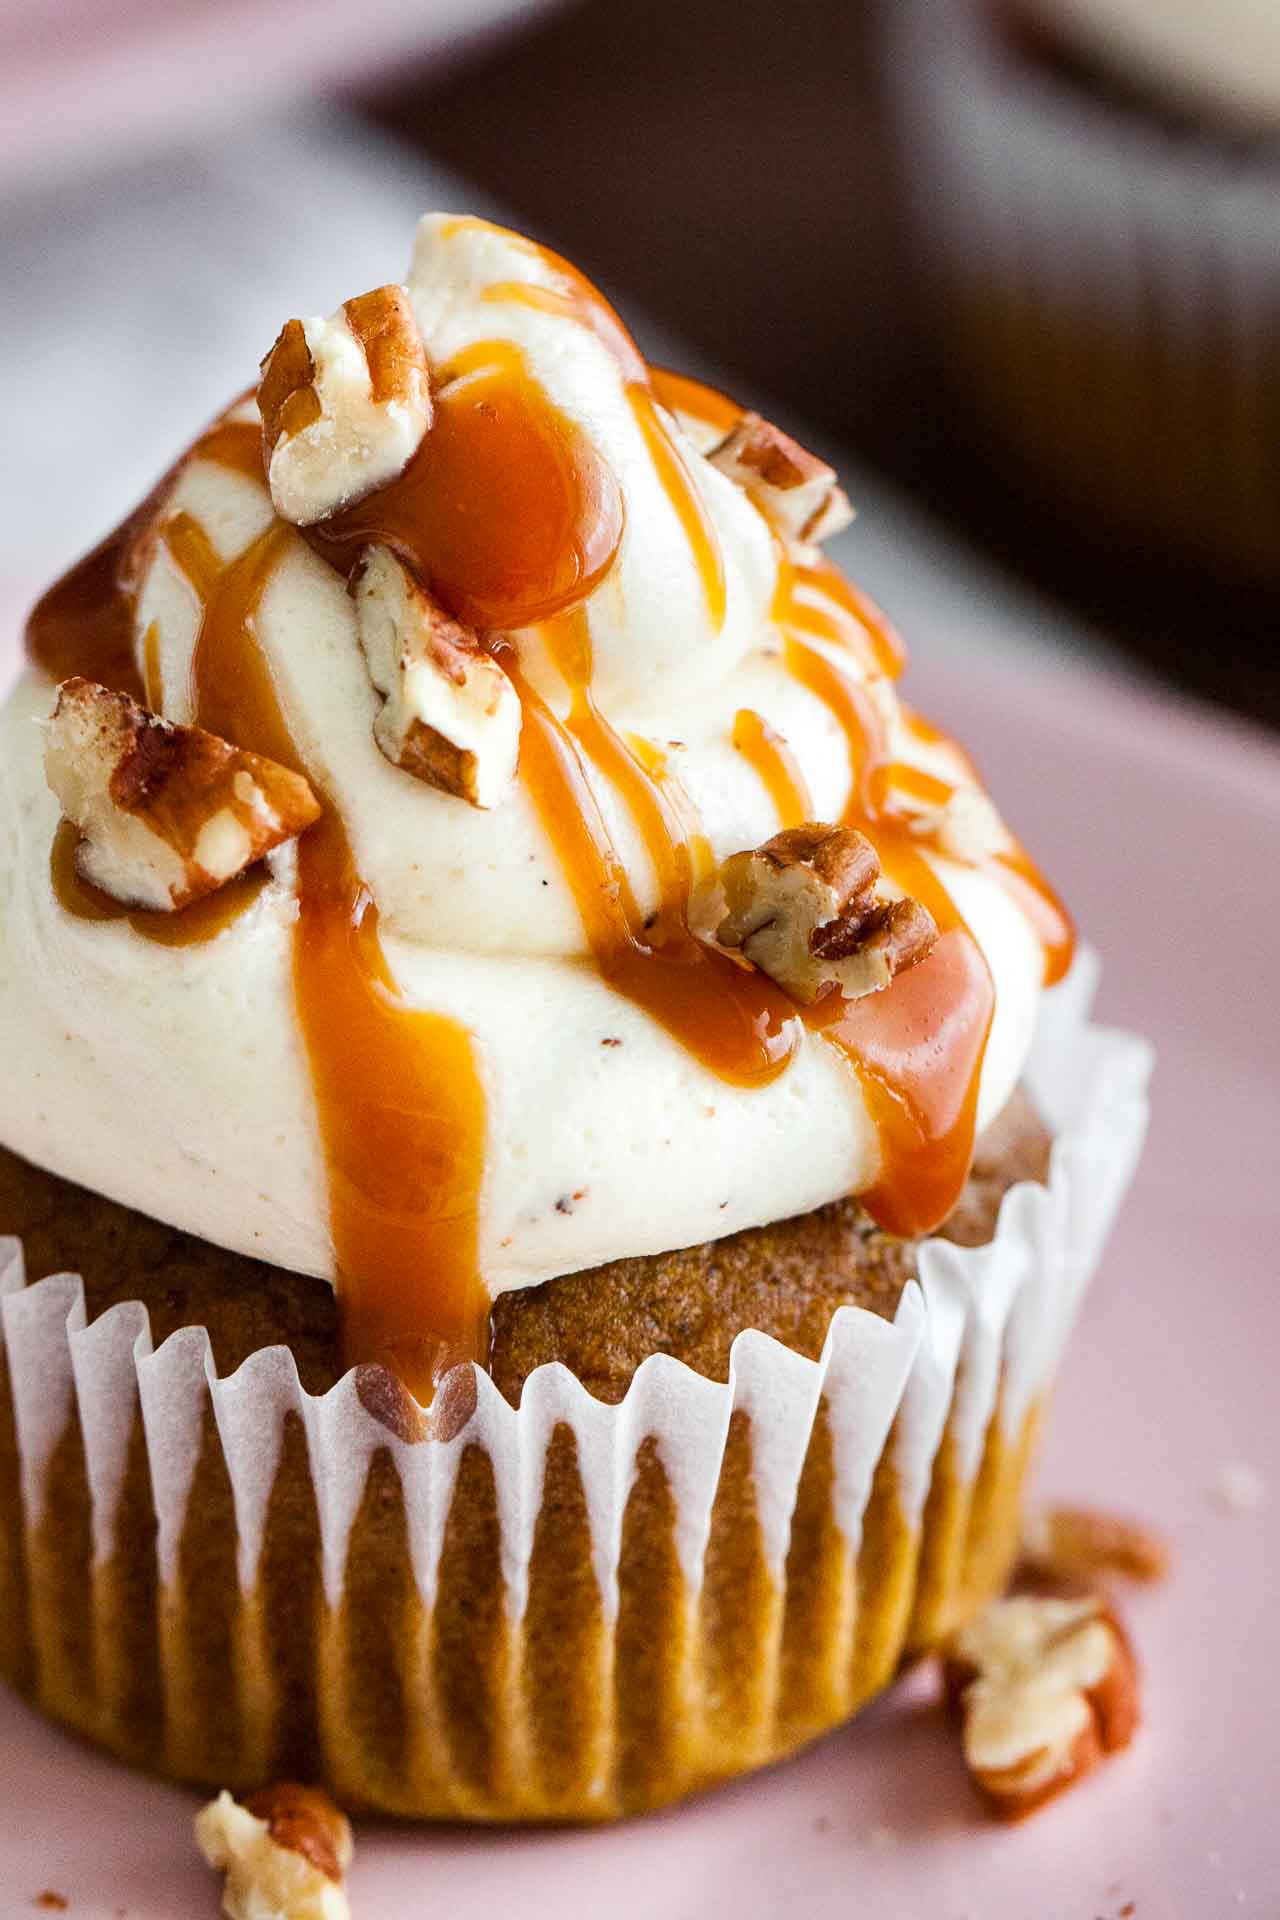 Close-up of a pumpkin cupcake with brown butter frosting, topped with caramel sauce and walnut pieces on a pink plate.